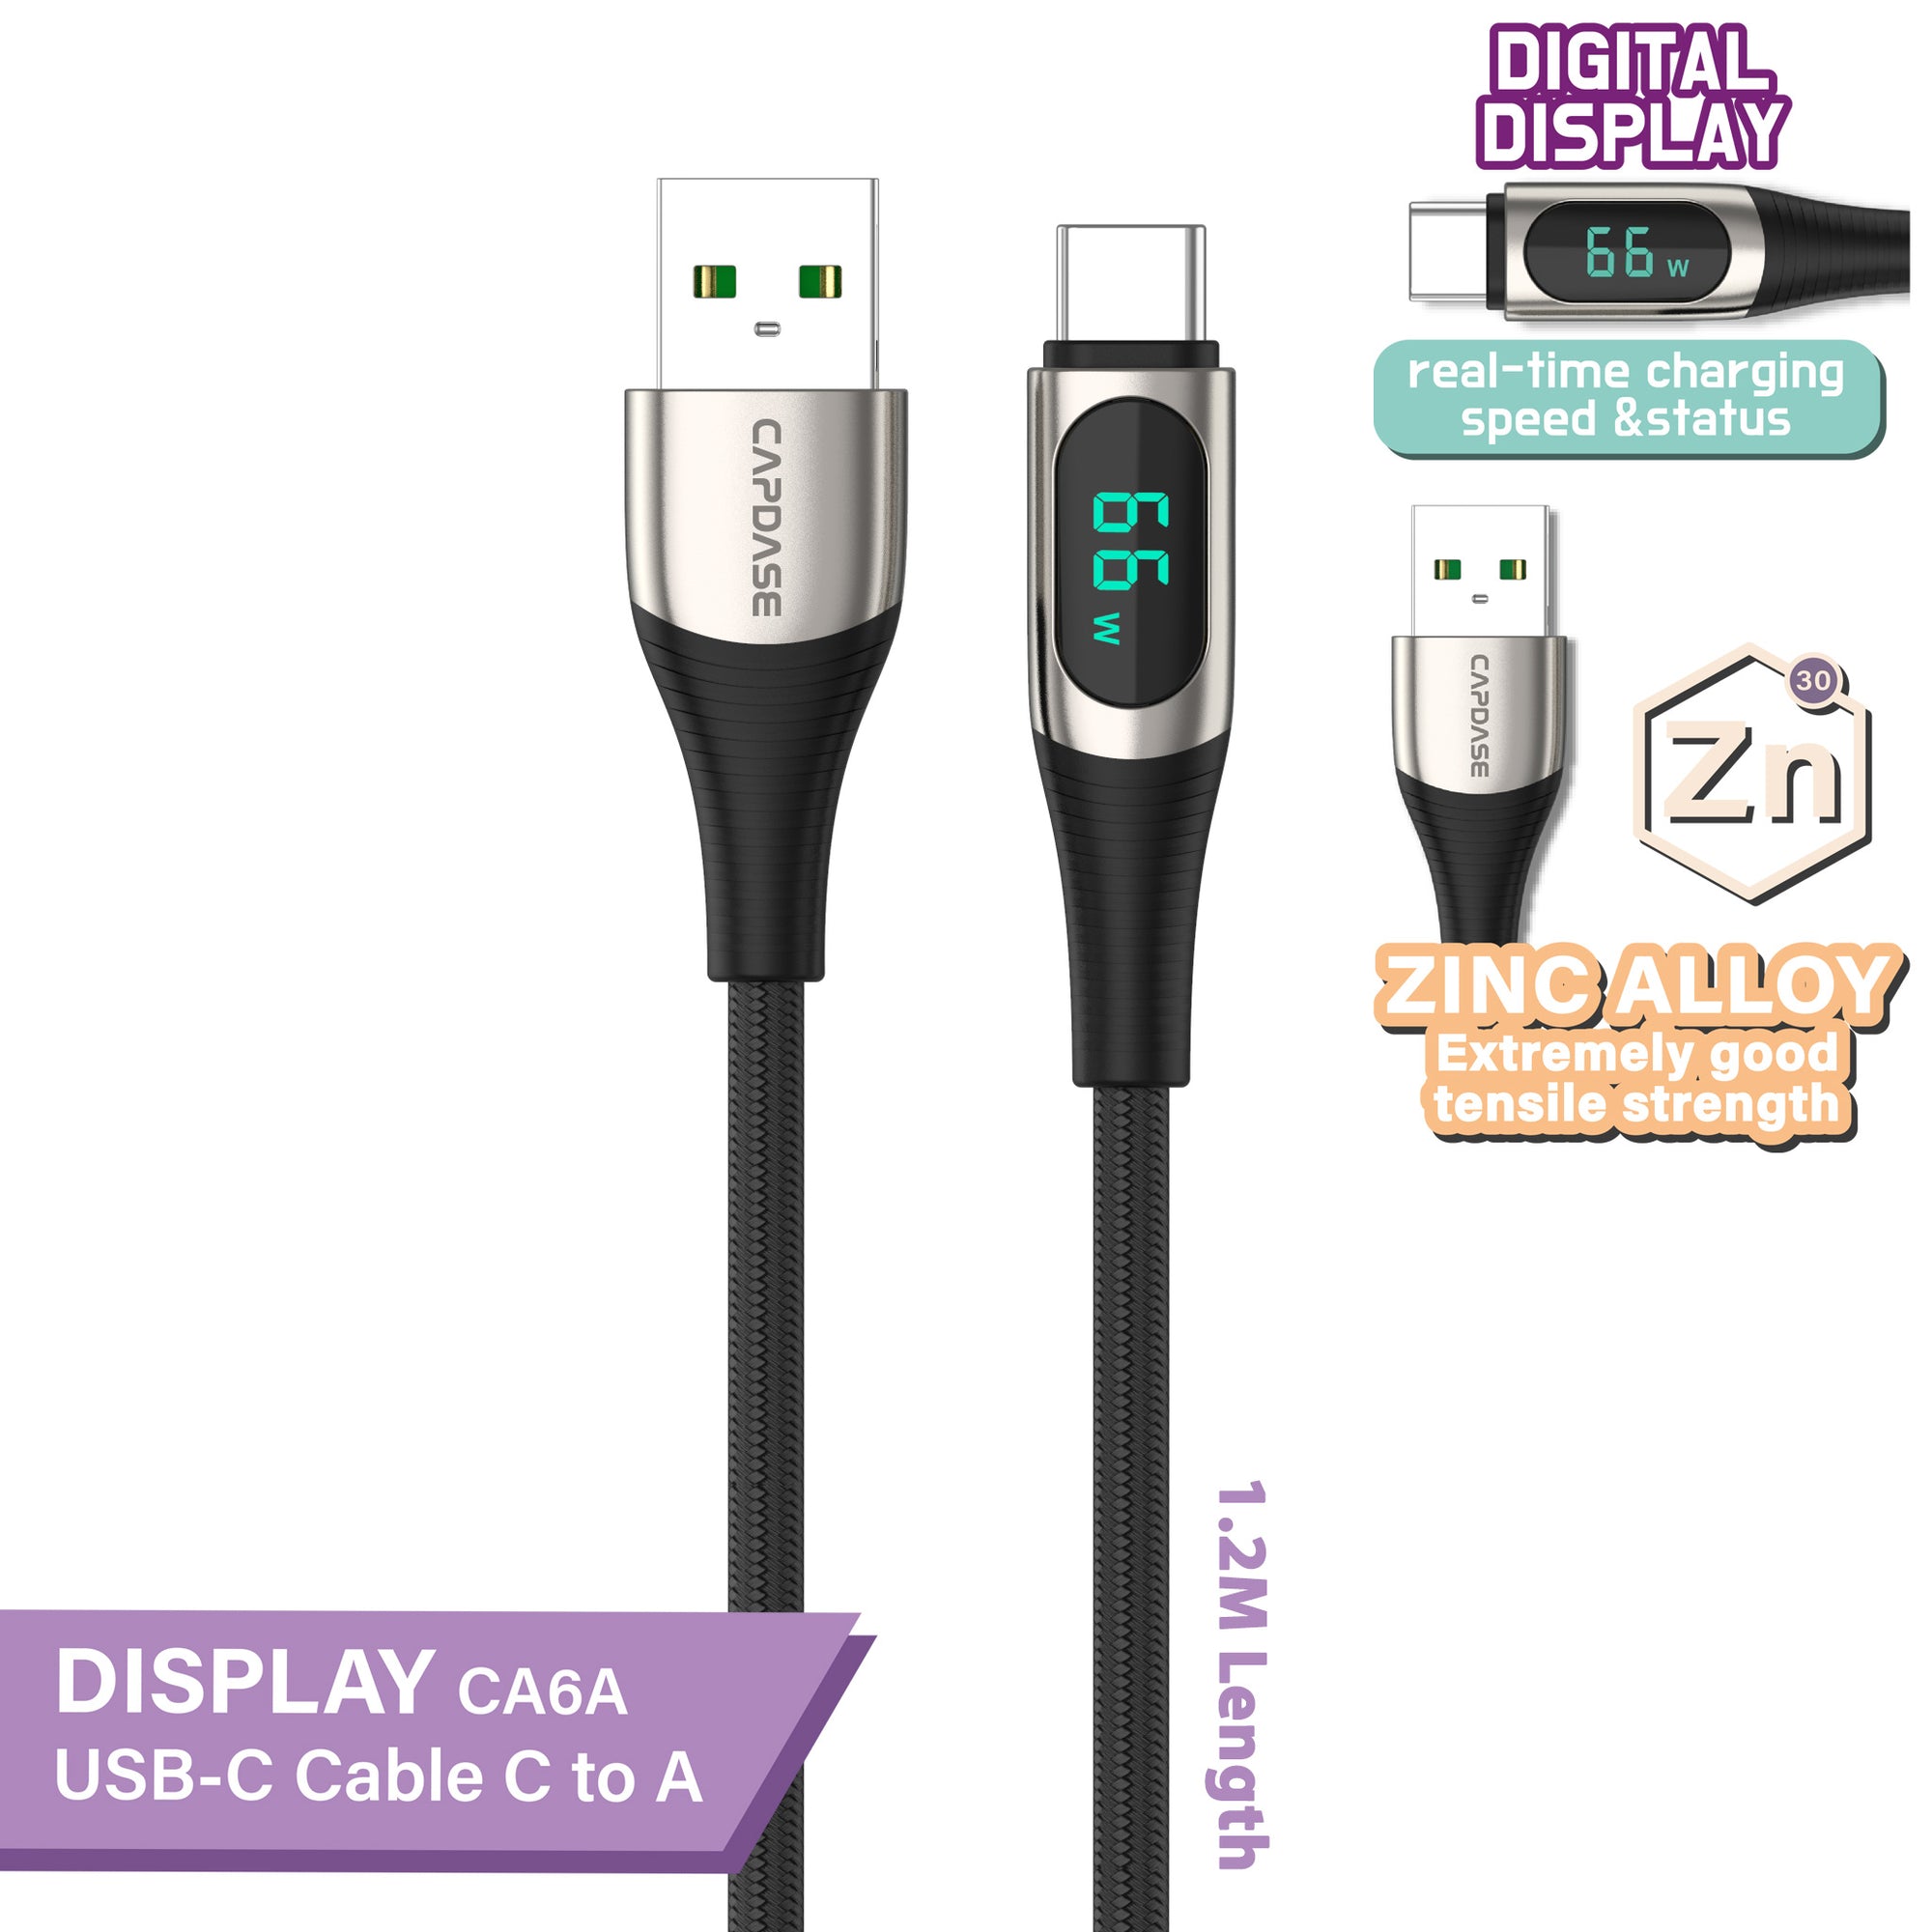 Display-CA6A USB-C To USB 6A Sync and Charge Cable 1.2M